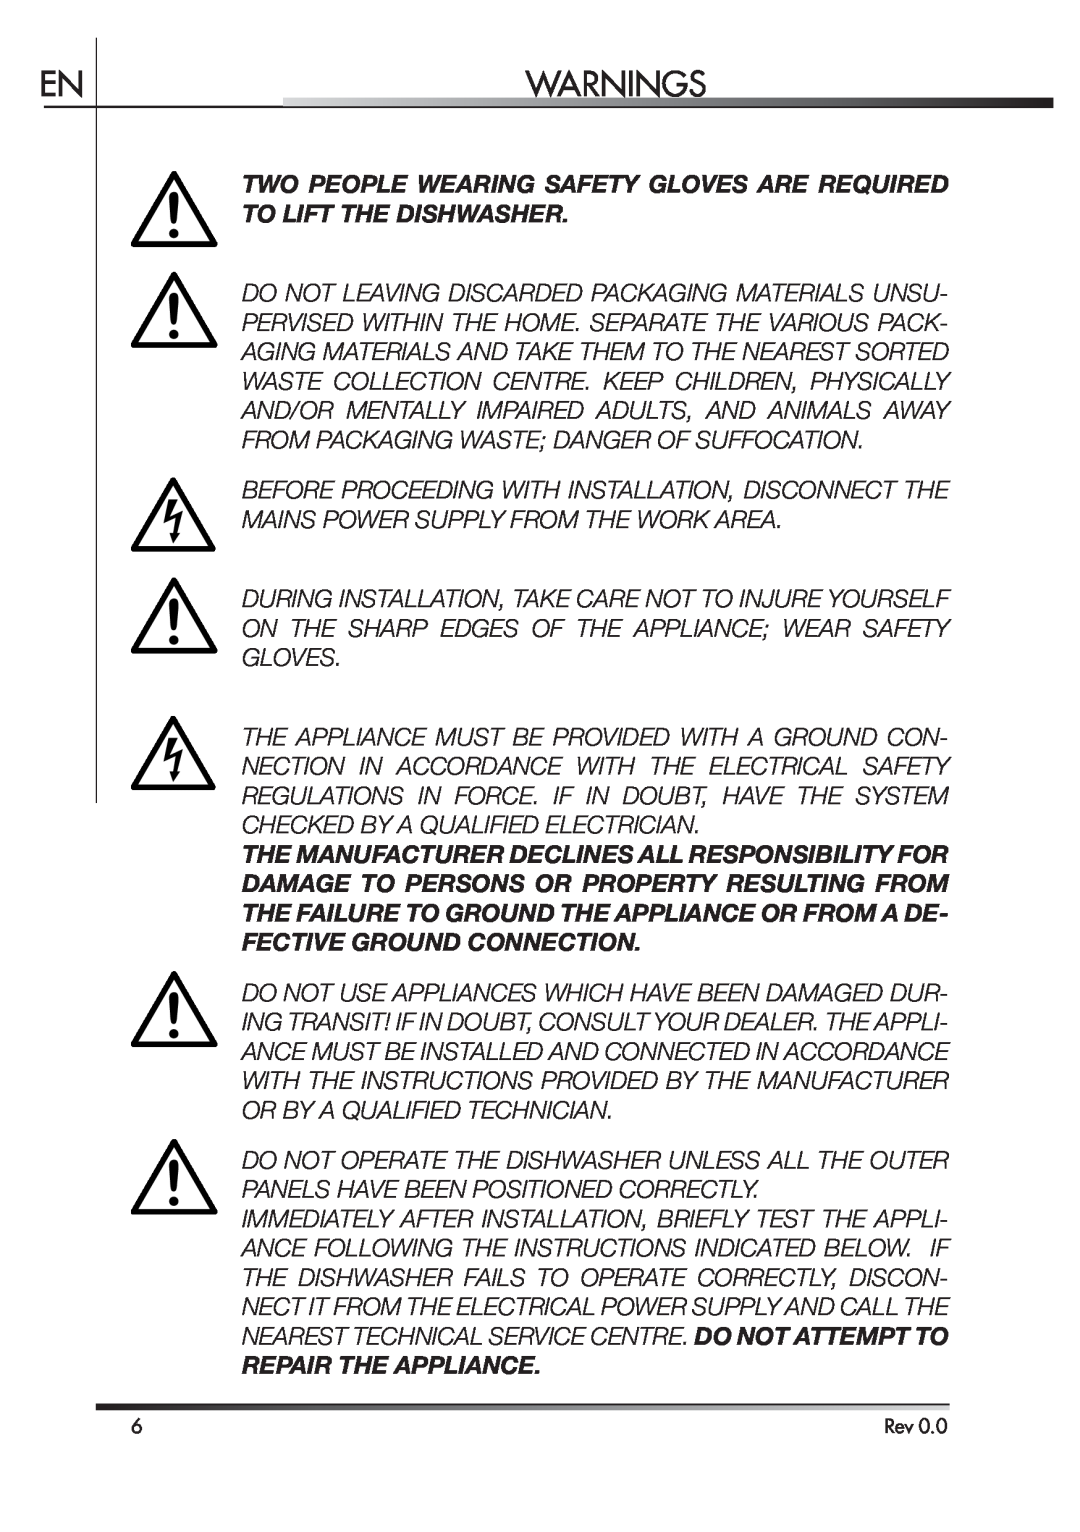 Smeg STA4645 Warnings, Two People Wearing Safety Gloves Are Required To Lift The Dishwasher, Repair The Appliance 